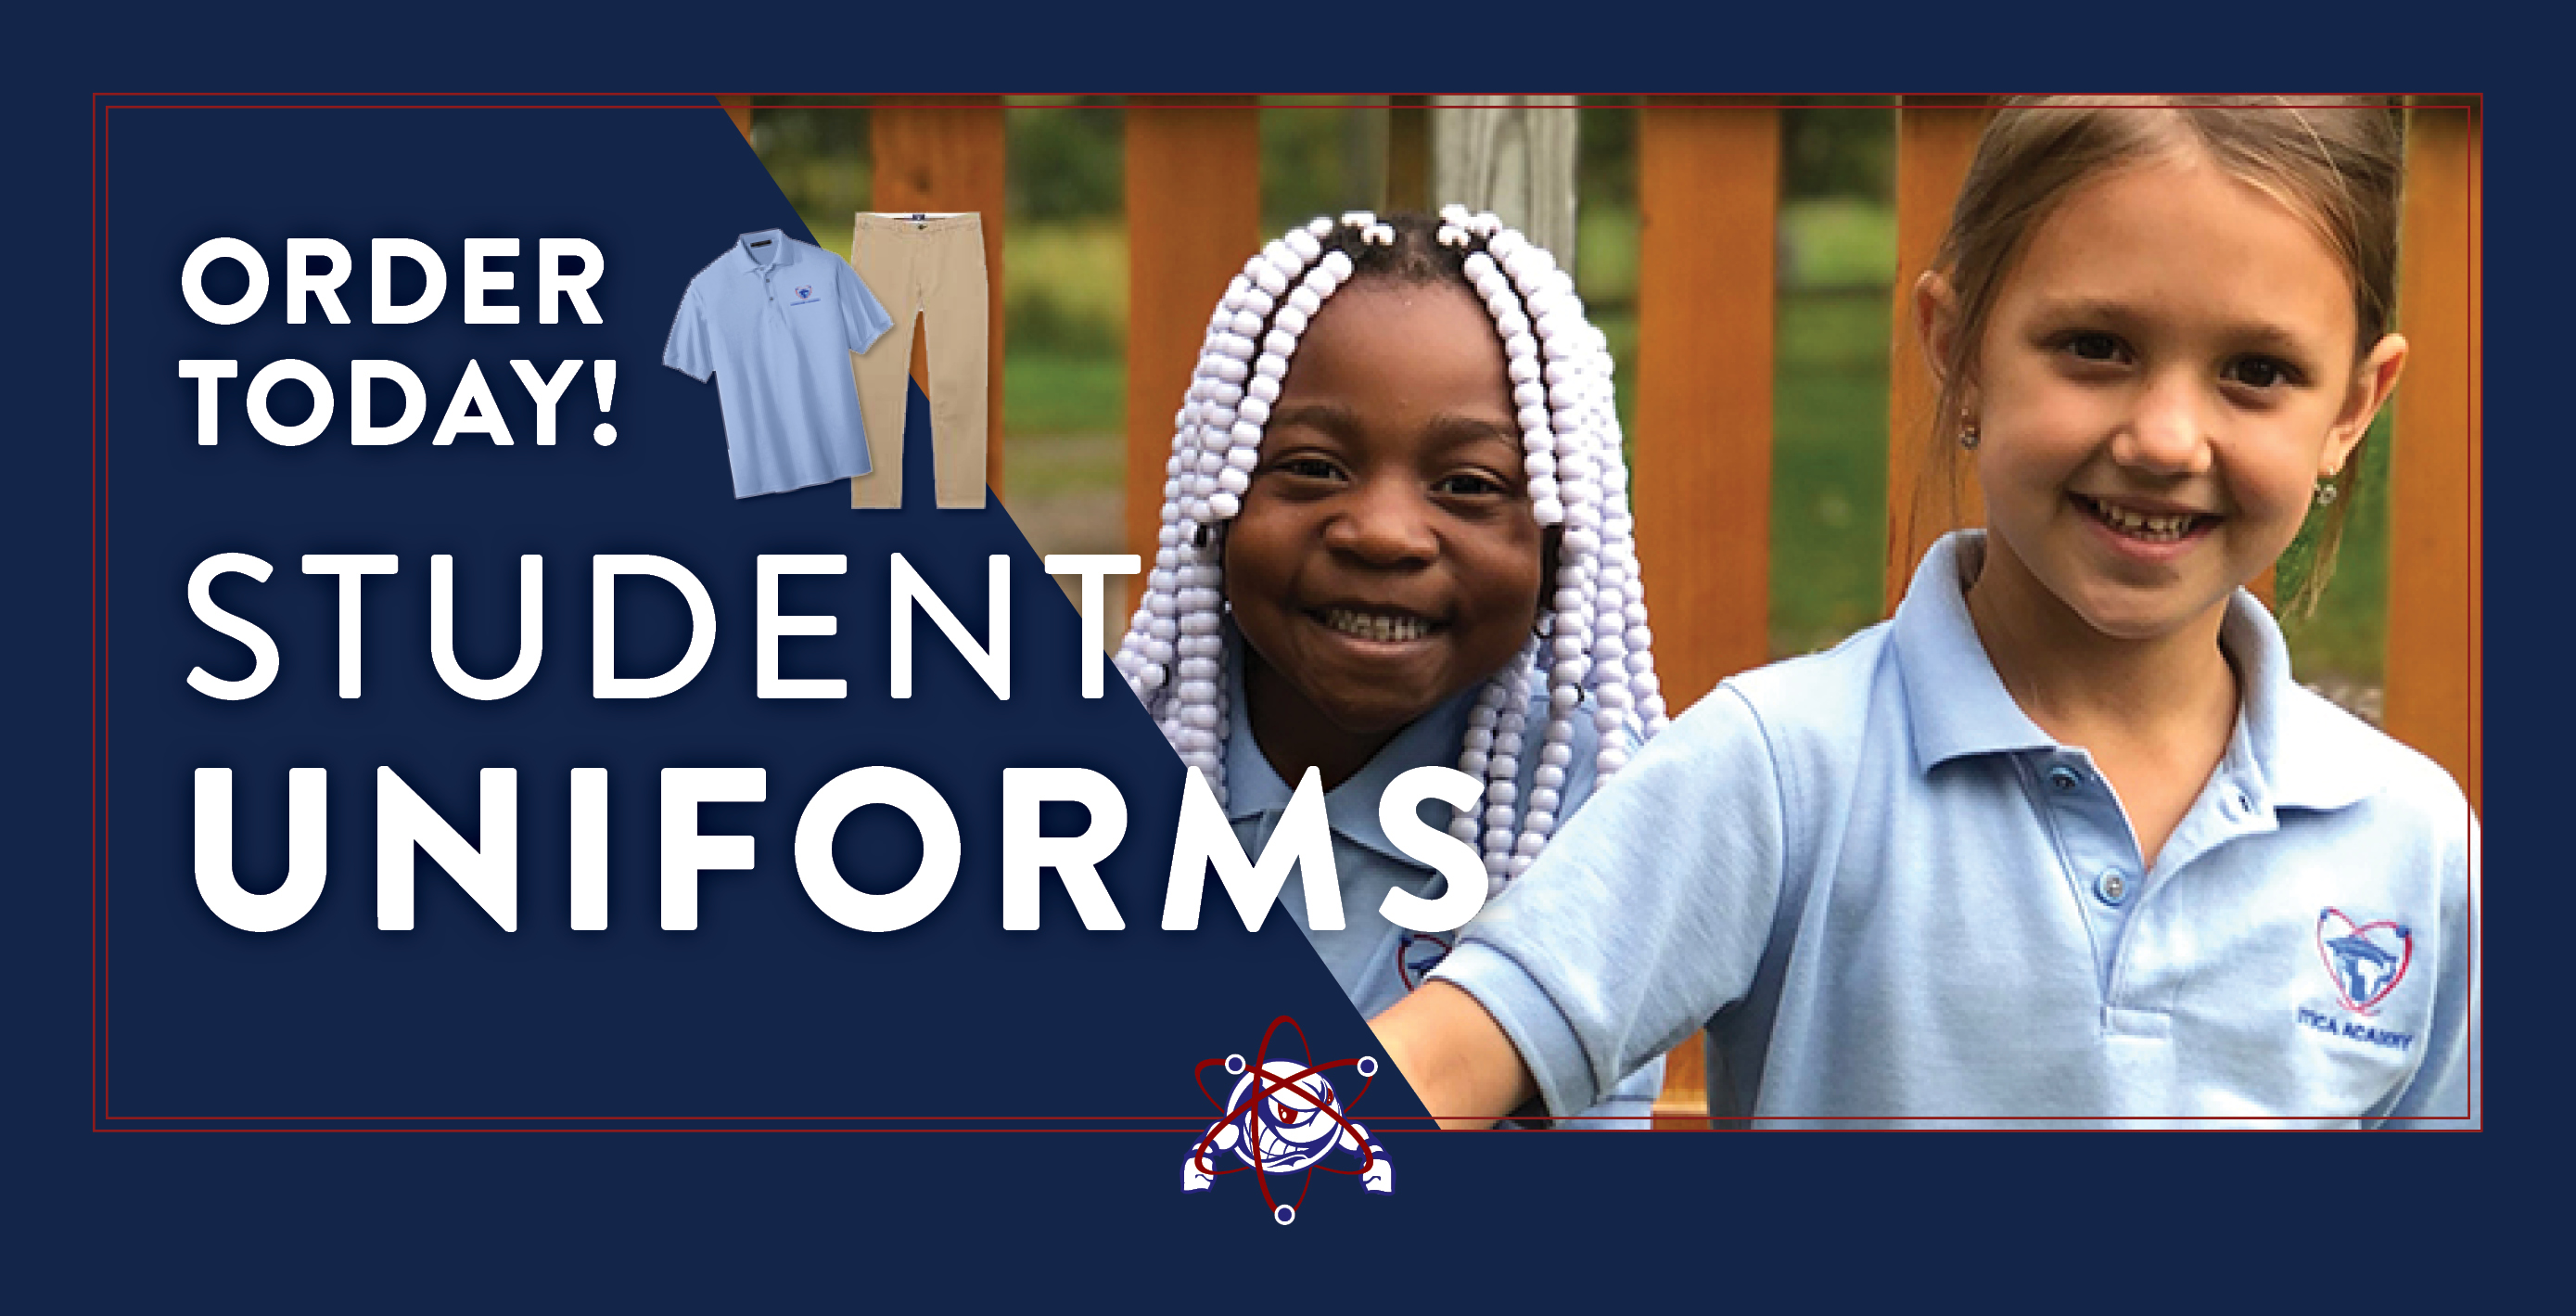 Utica Academy of Science reminds its families to order their student’s school uniform as soon as possible to ensure their Atom is ready for the first day of school. All school uniform orders must be placed online and will be shipped directly to your home.